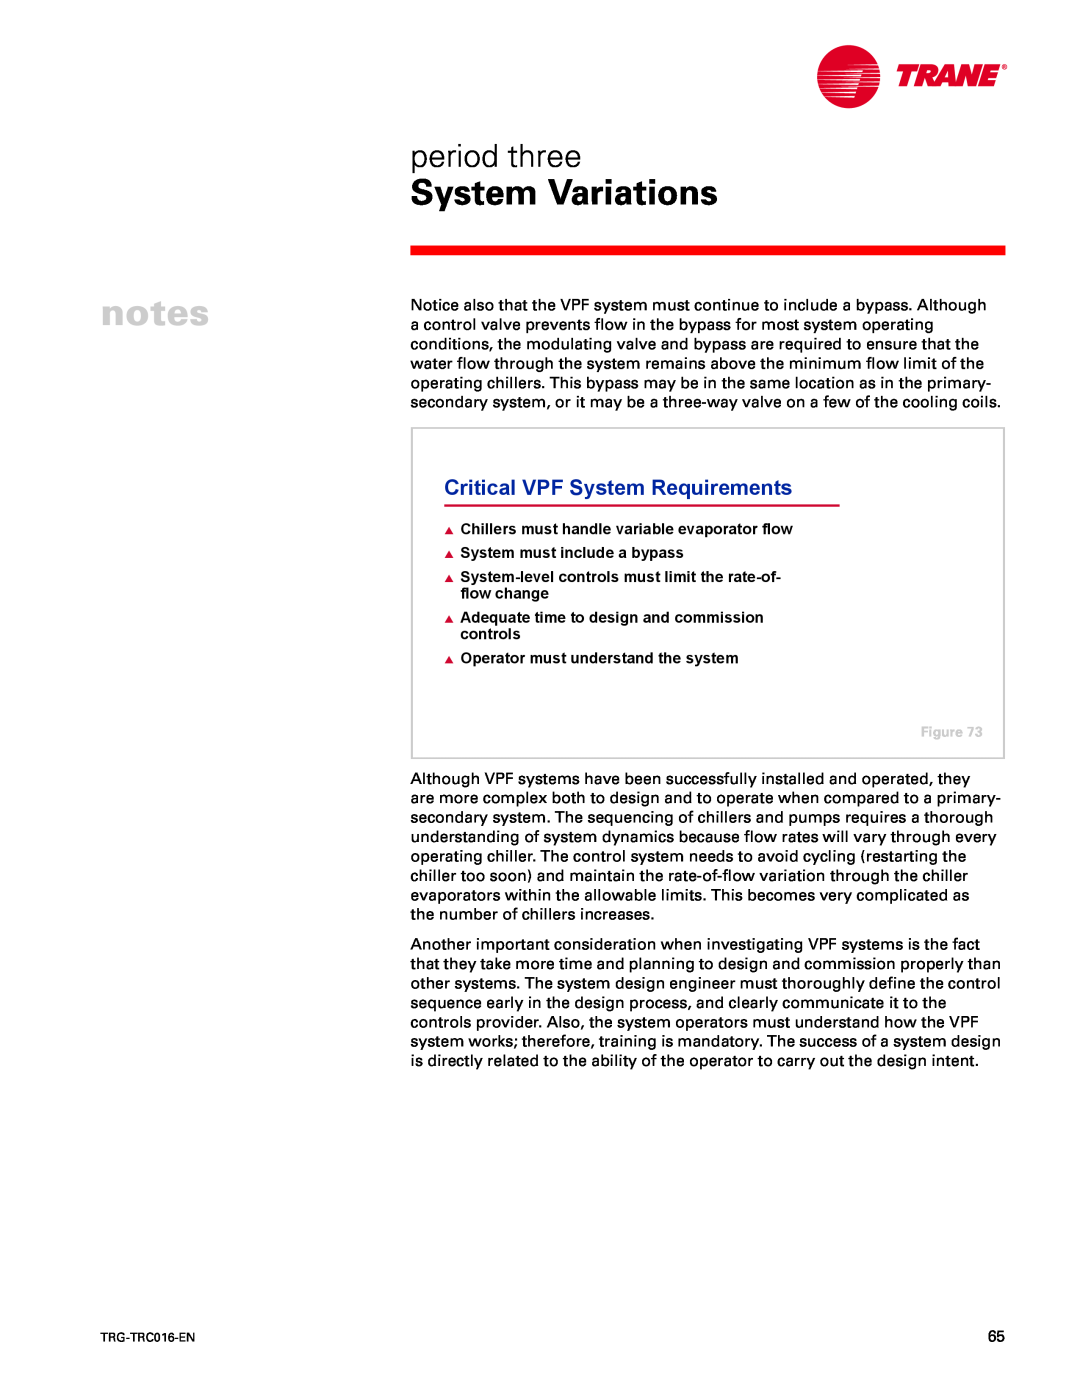 Trane TRG-TRC016-EN Critical VPF System Requirements, notes, System Variations, period three, System must include a bypass 